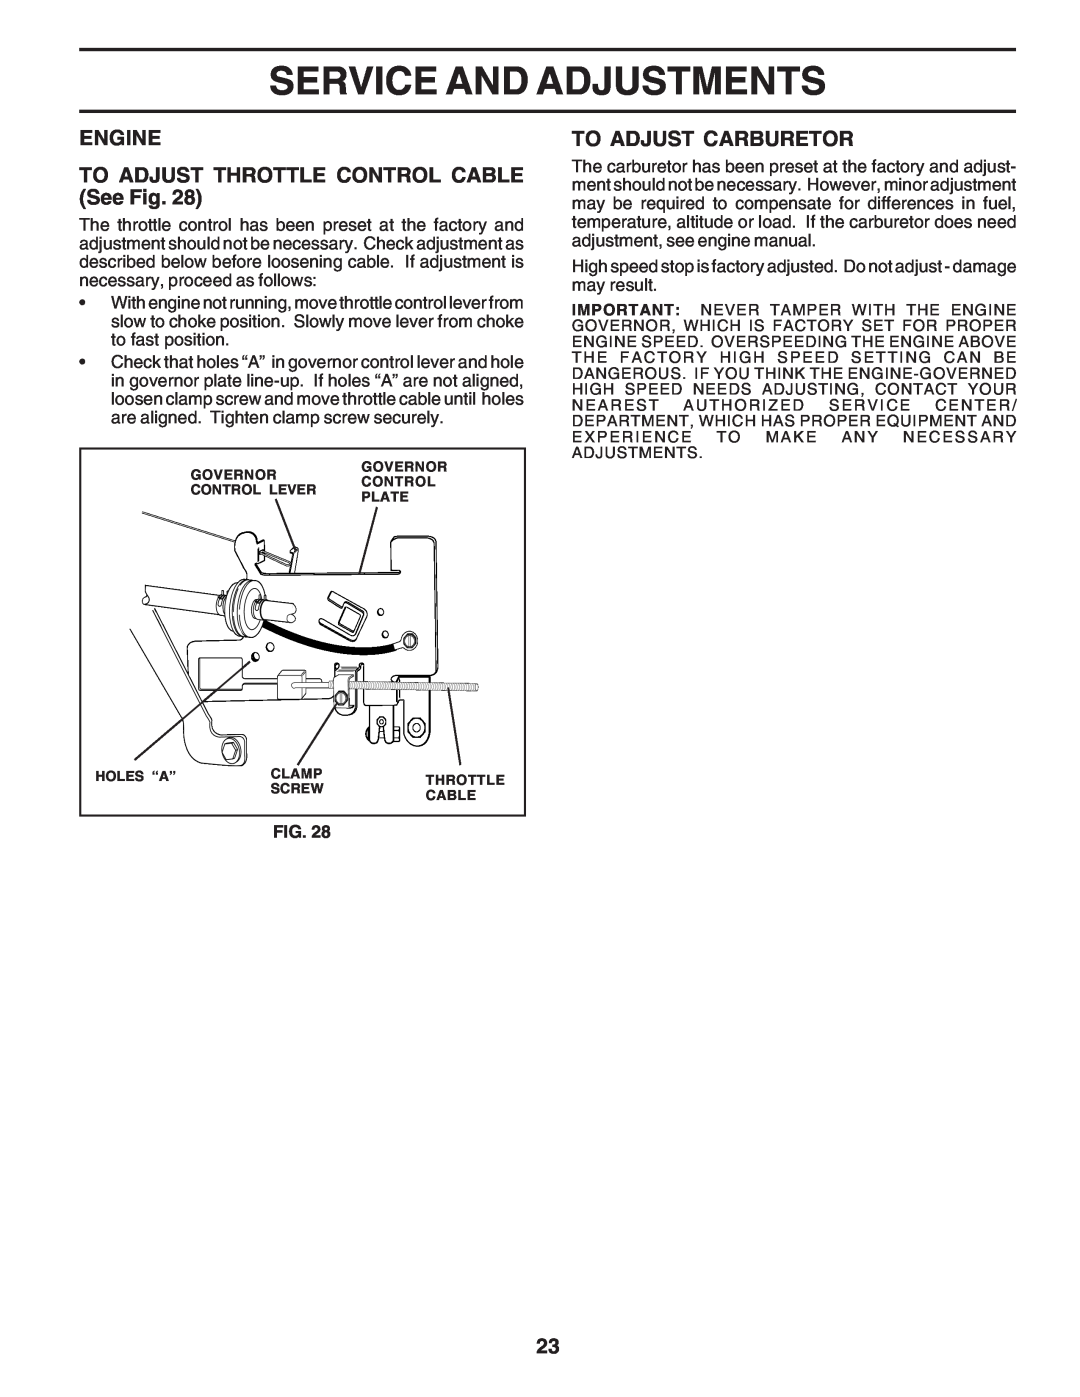 Poulan PC1538B manual ENGINE TO ADJUST THROTTLE CONTROL CABLE See Fig, To Adjust Carburetor, Service And Adjustments 